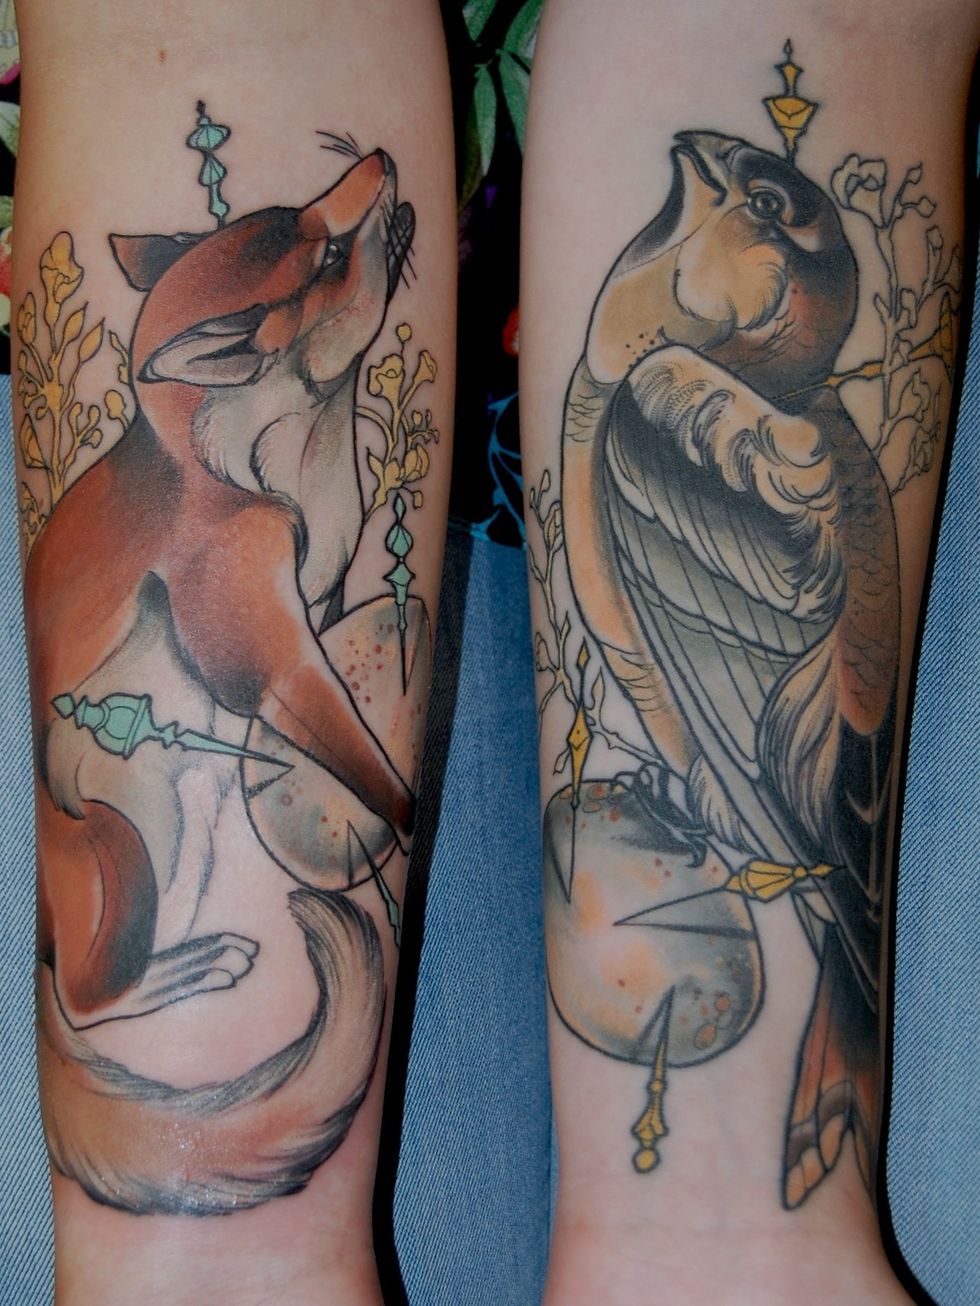 Tattoo, Joint, Muscle, Art, Temporary tattoo, Design, Calf, Wing, Ink, Cover-up, 